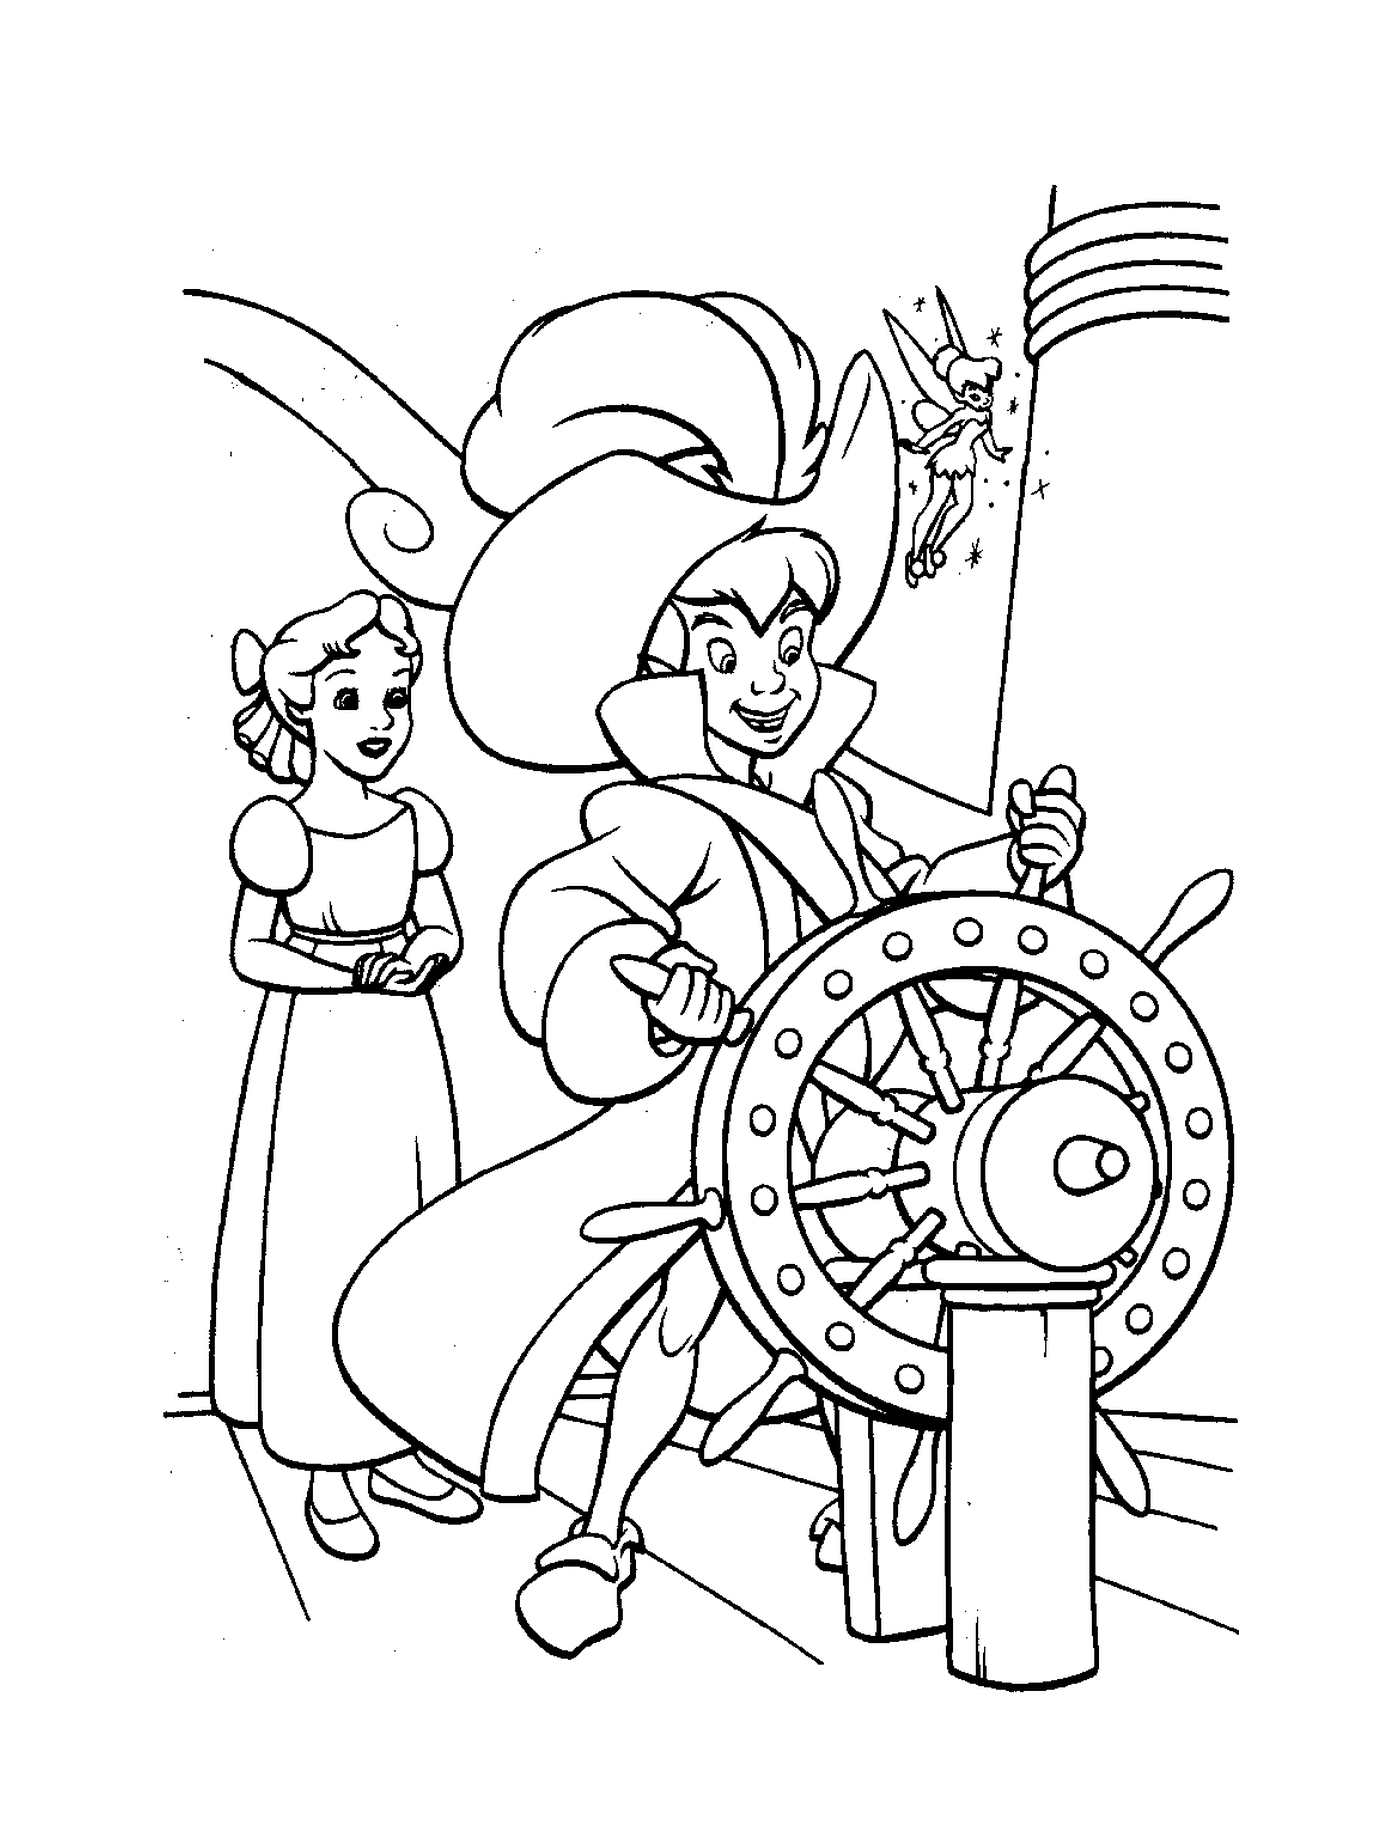  Peter Pan at the helm of the pirate ship 